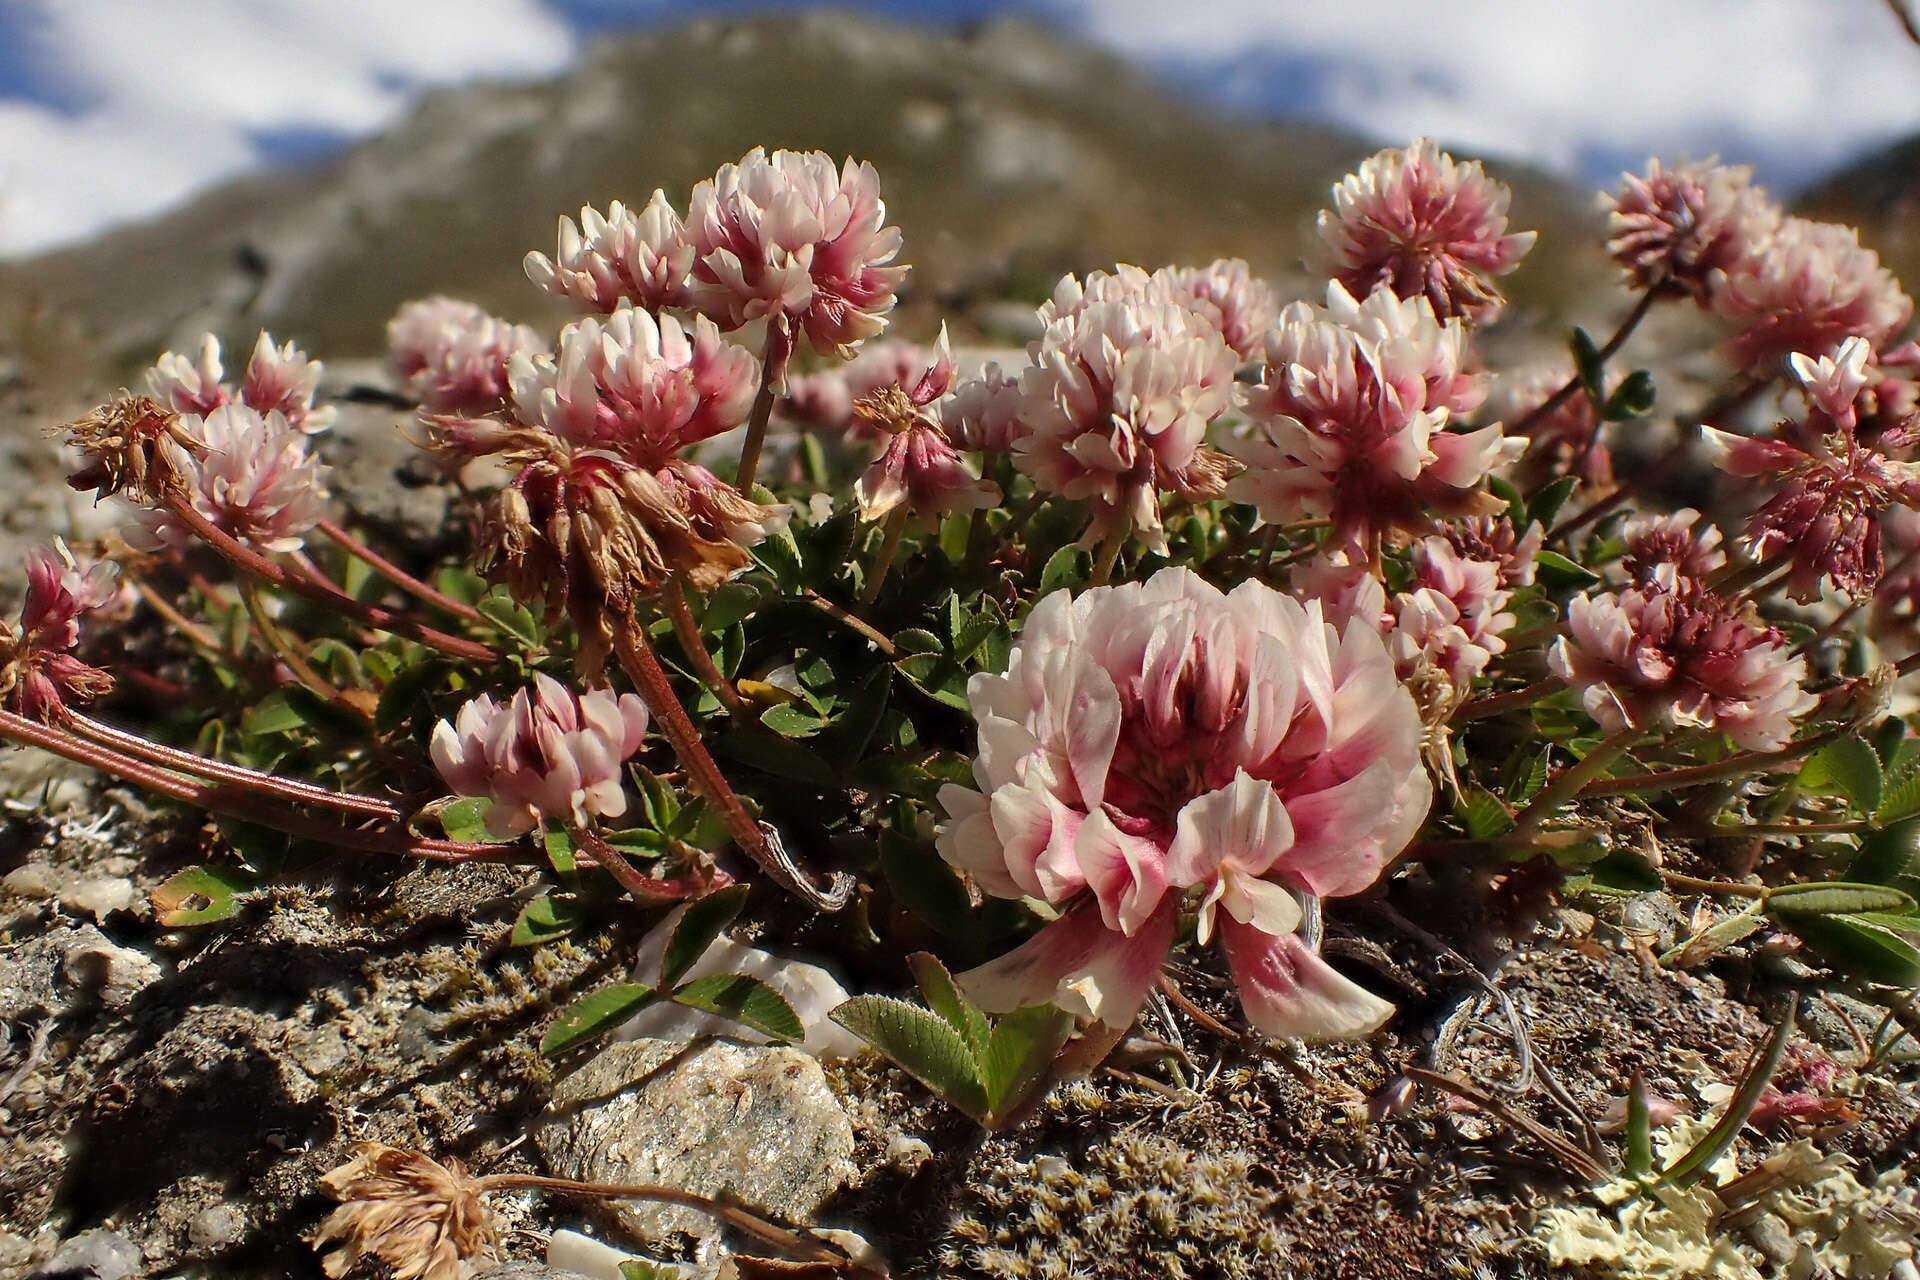 Image of Pale Clover